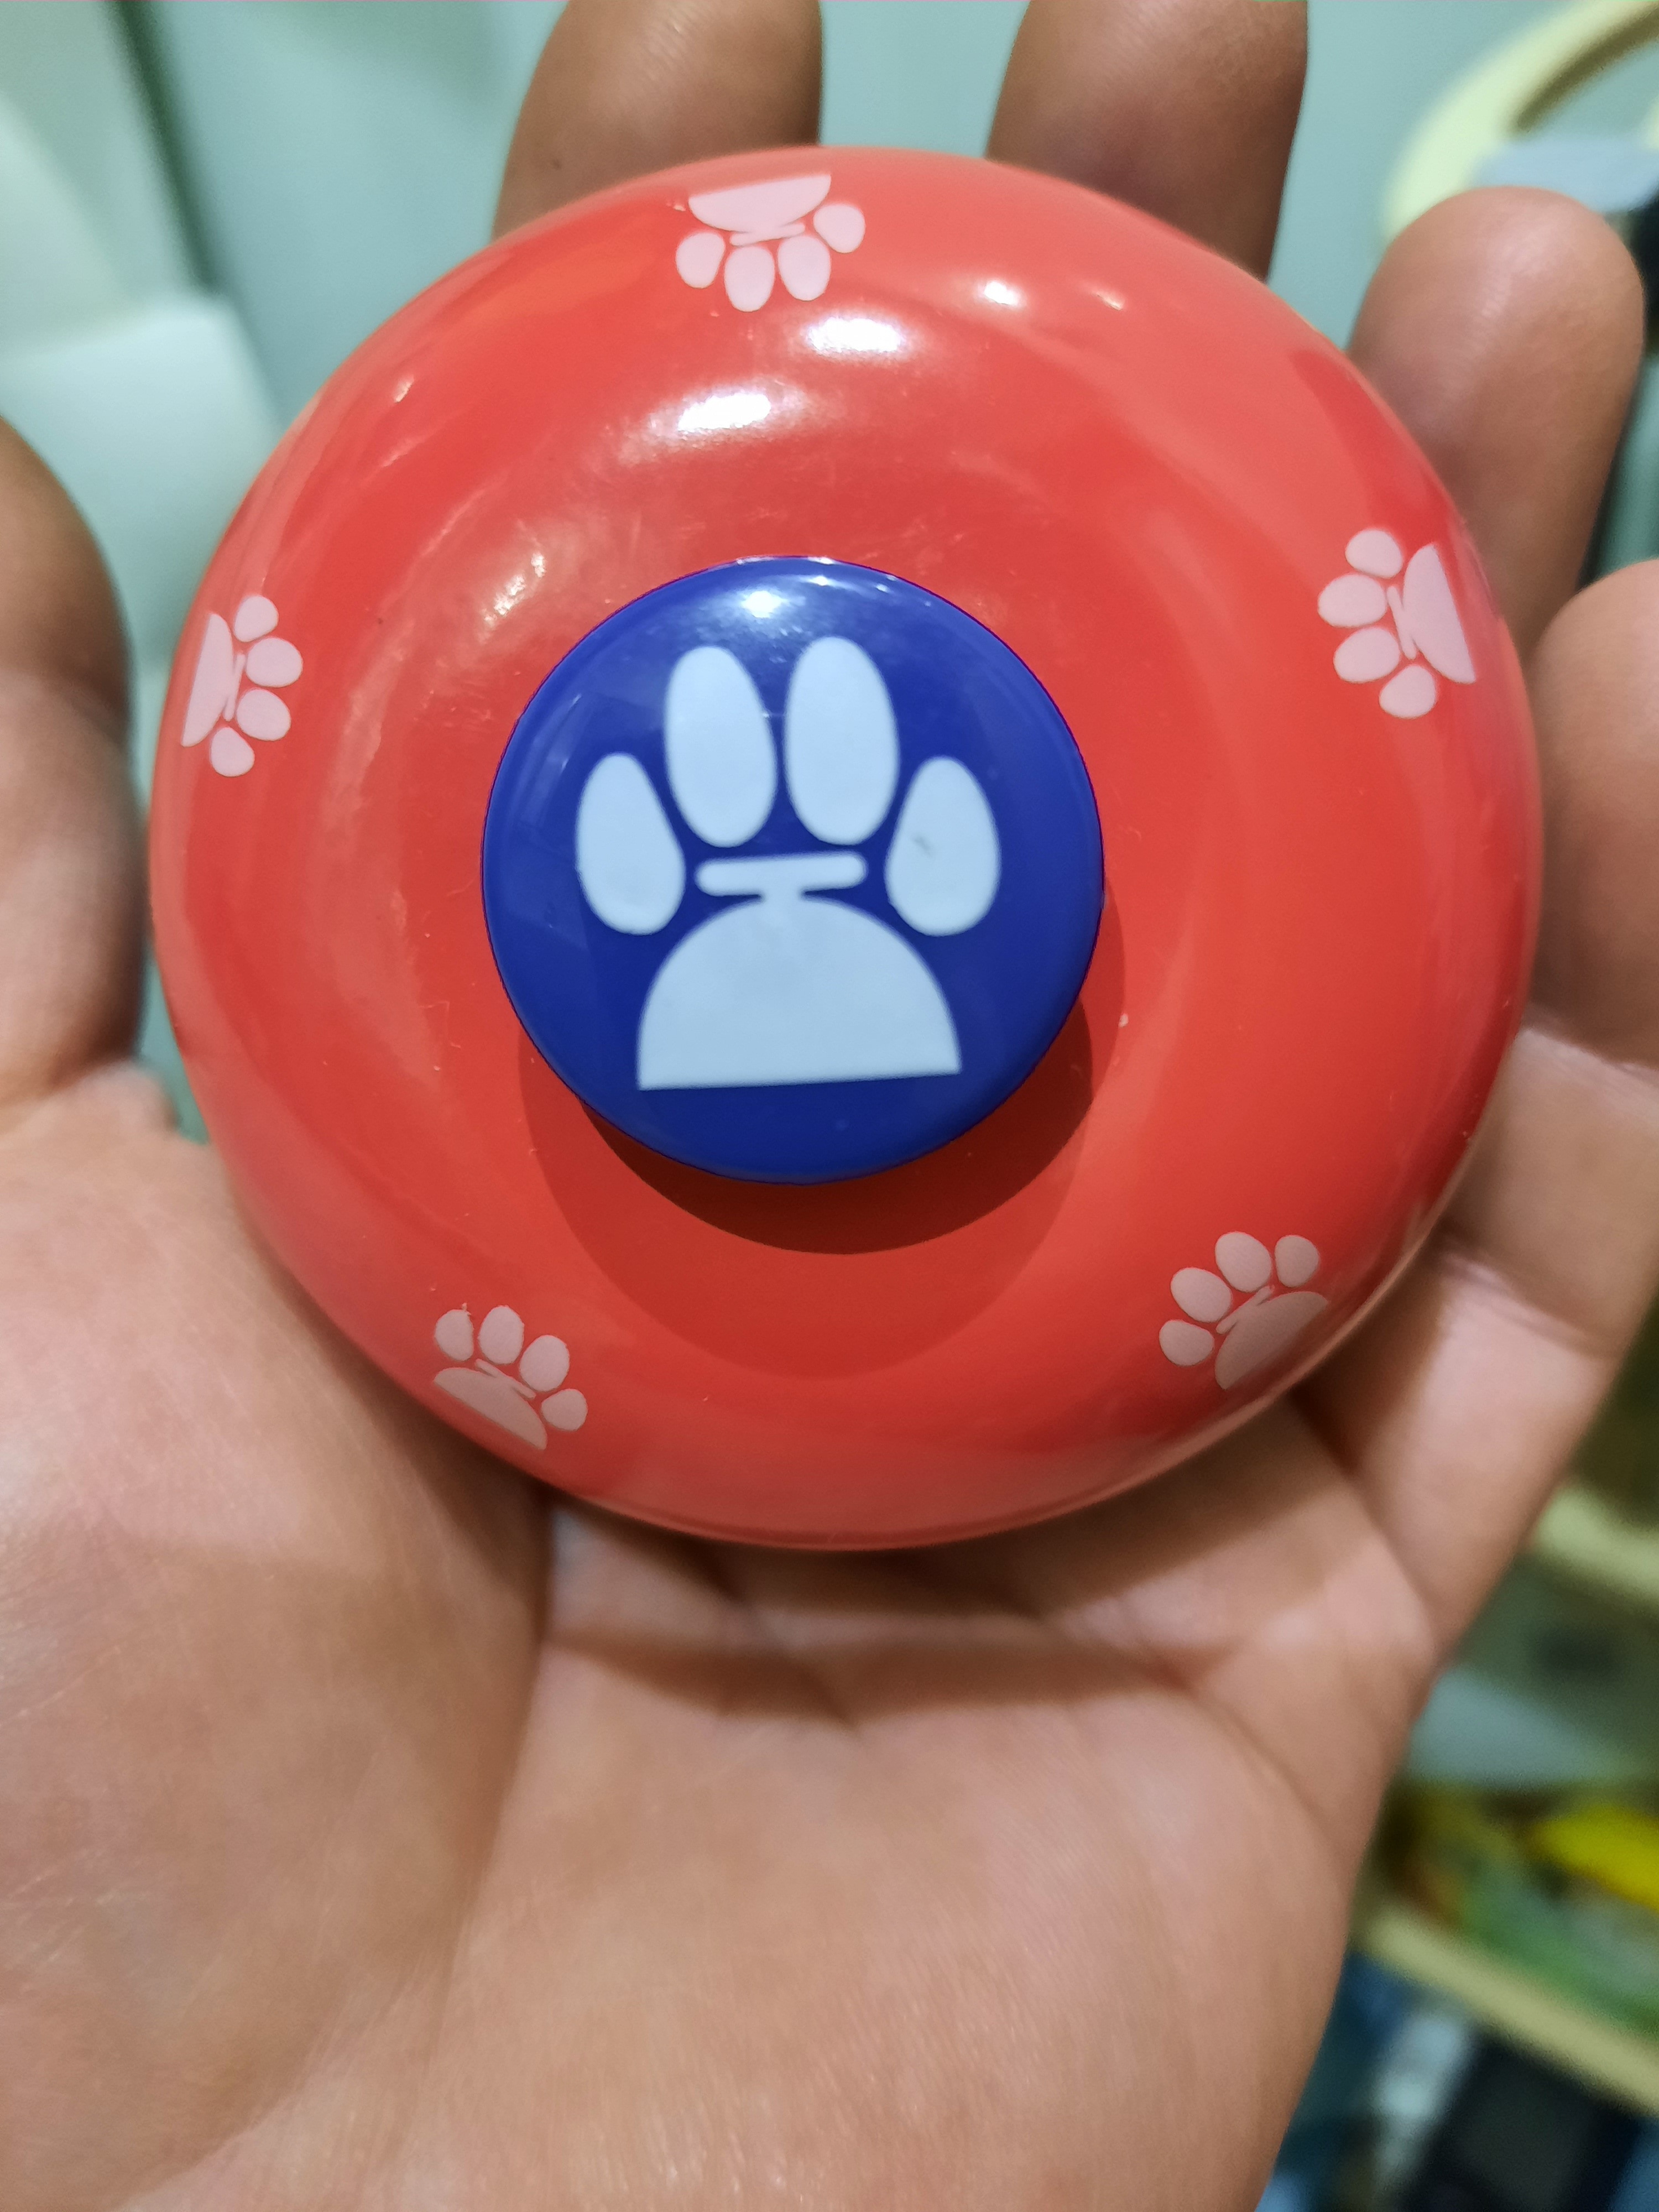 Dinner Bell Pet Training Toy for Dog Cat - Interactive Food Feed Reminder photo review